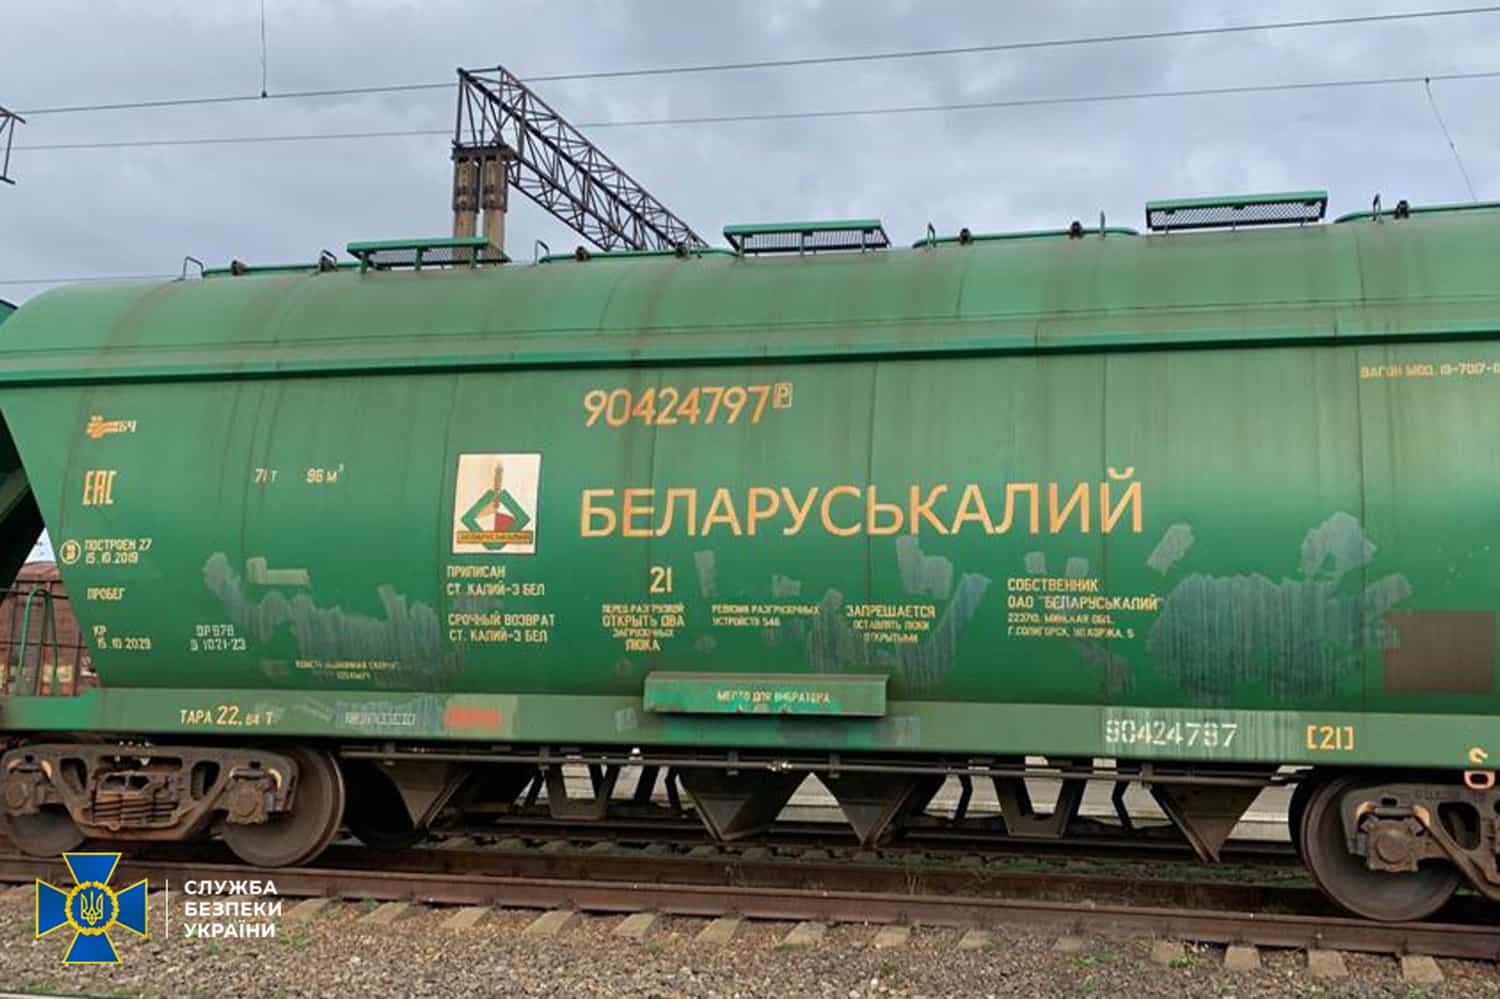 Ukraine arrested 170 cars with potash from Belarus and Russia, which arrived before the start of the war: what could this mean?